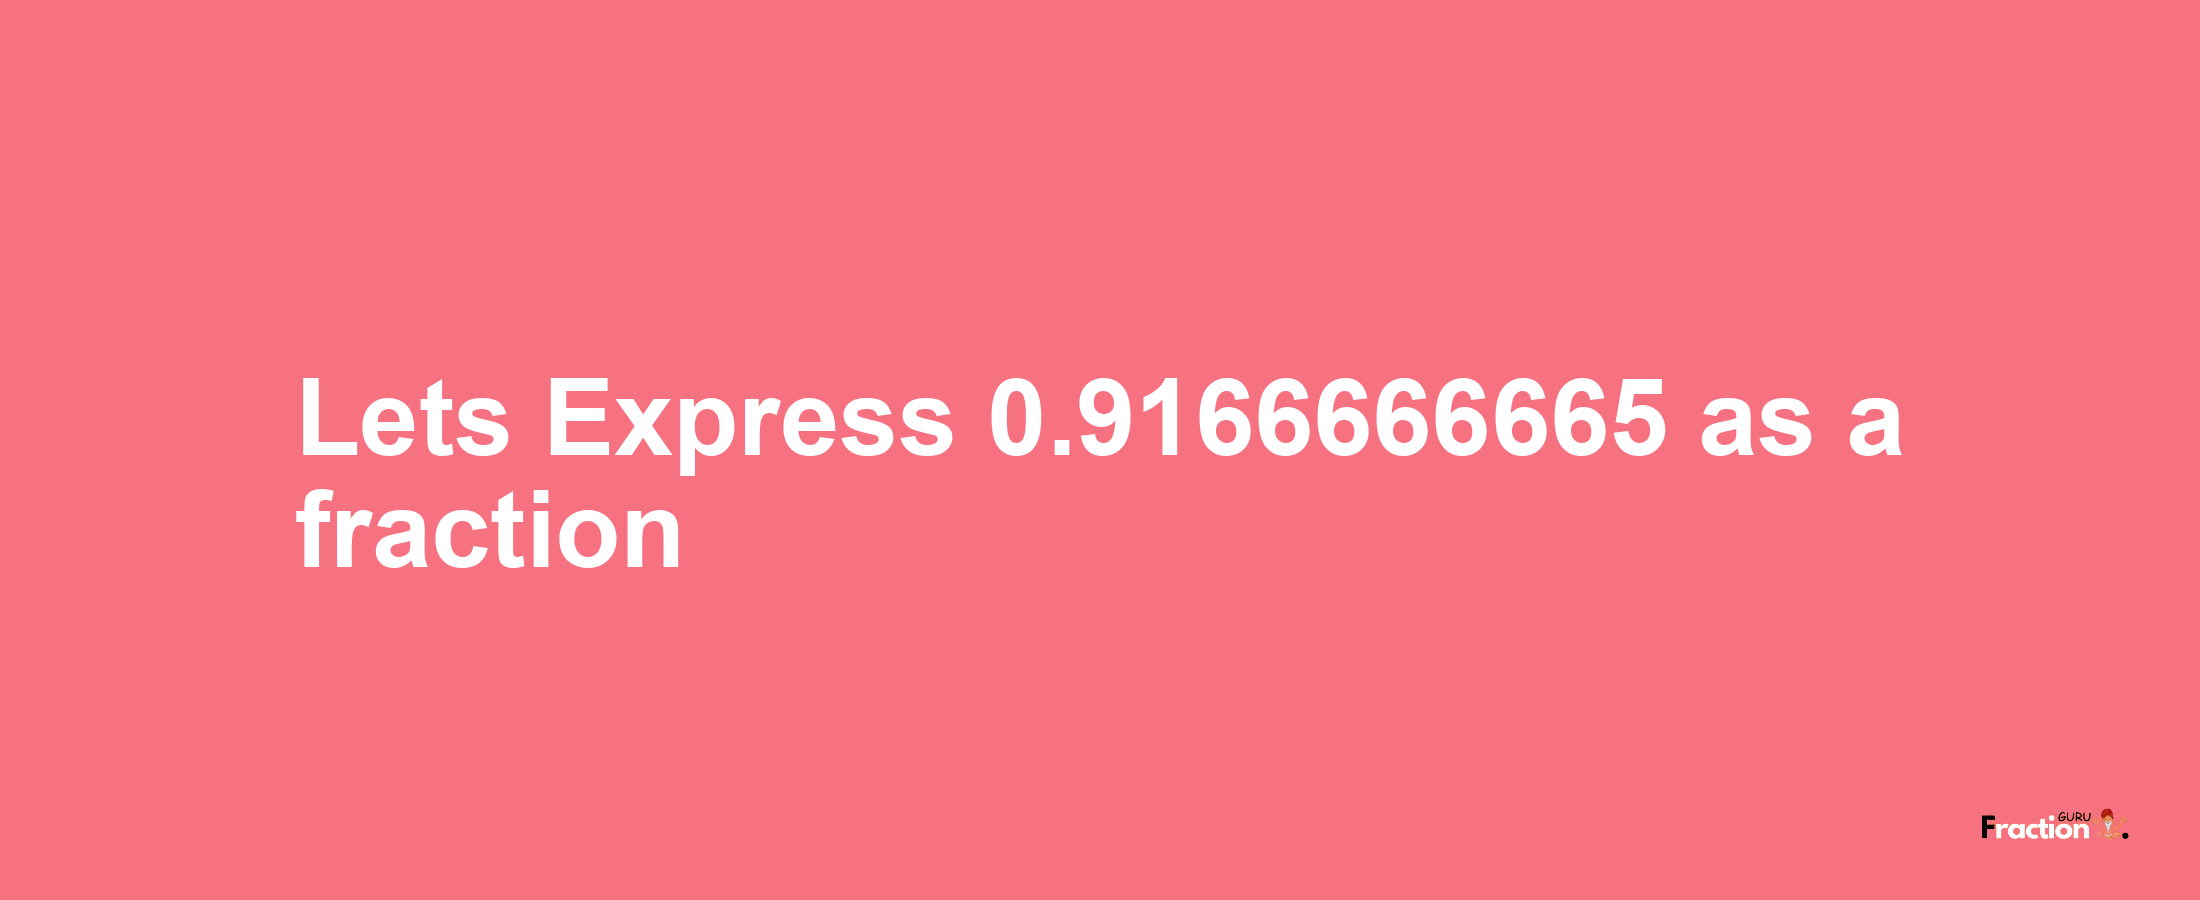 Lets Express 0.9166666665 as afraction